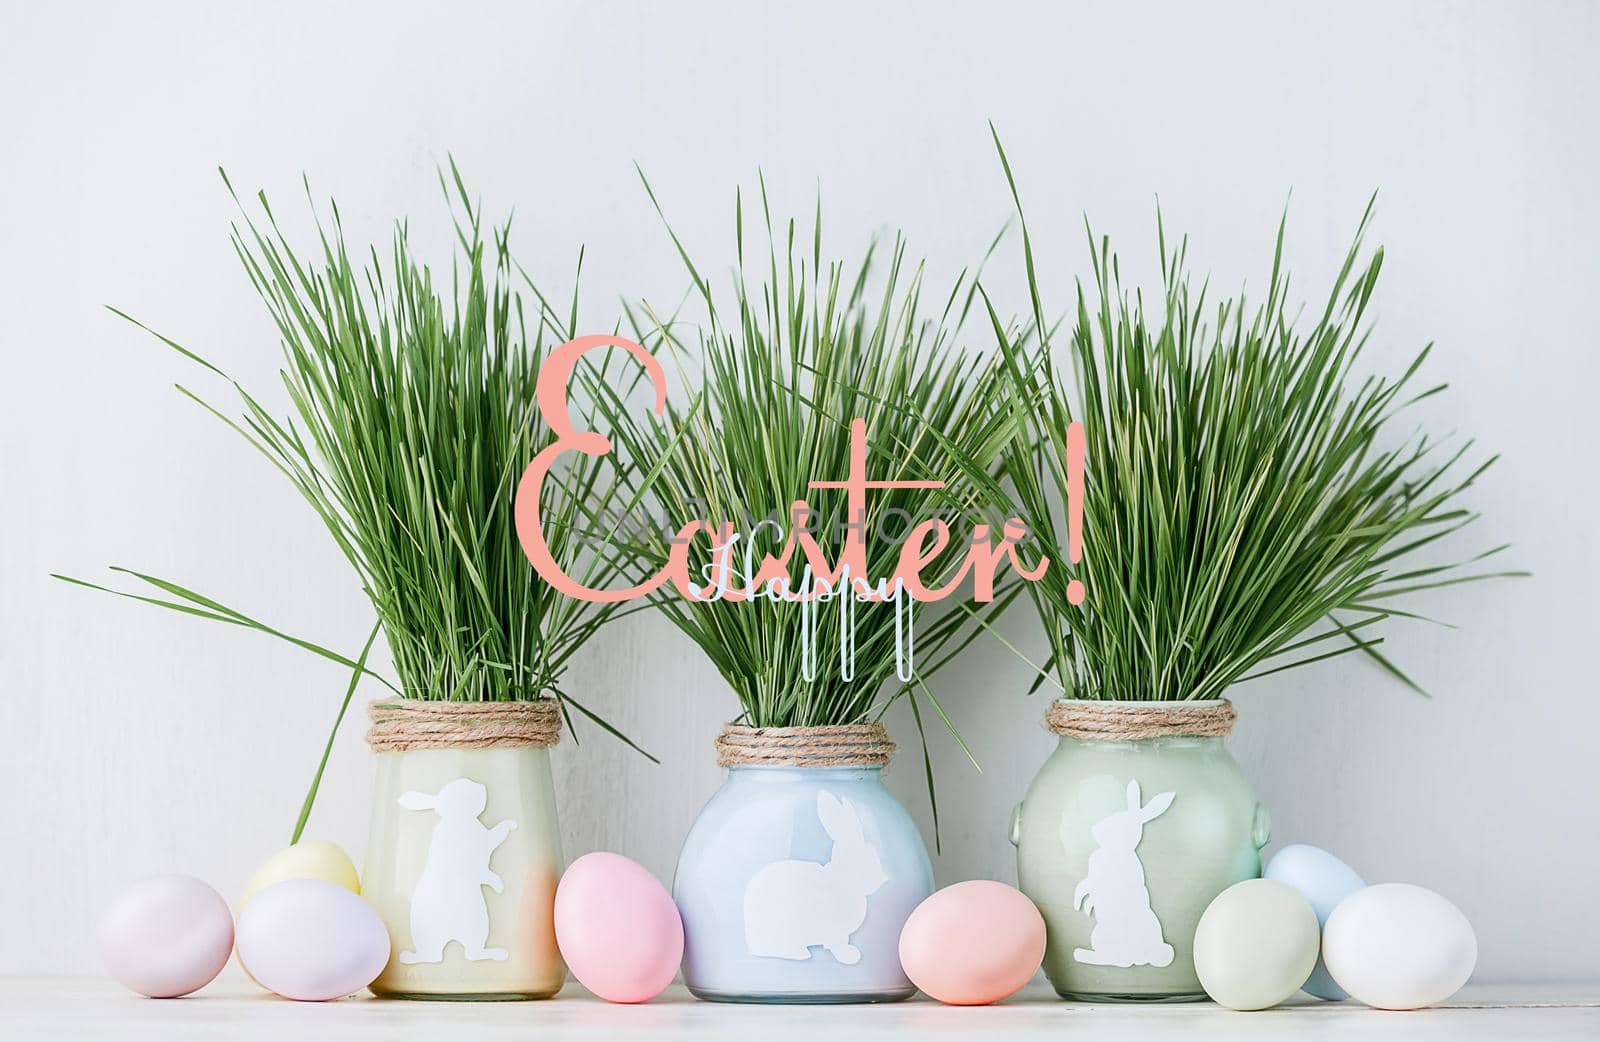 Cute creative photo with easter eggs by vvmich